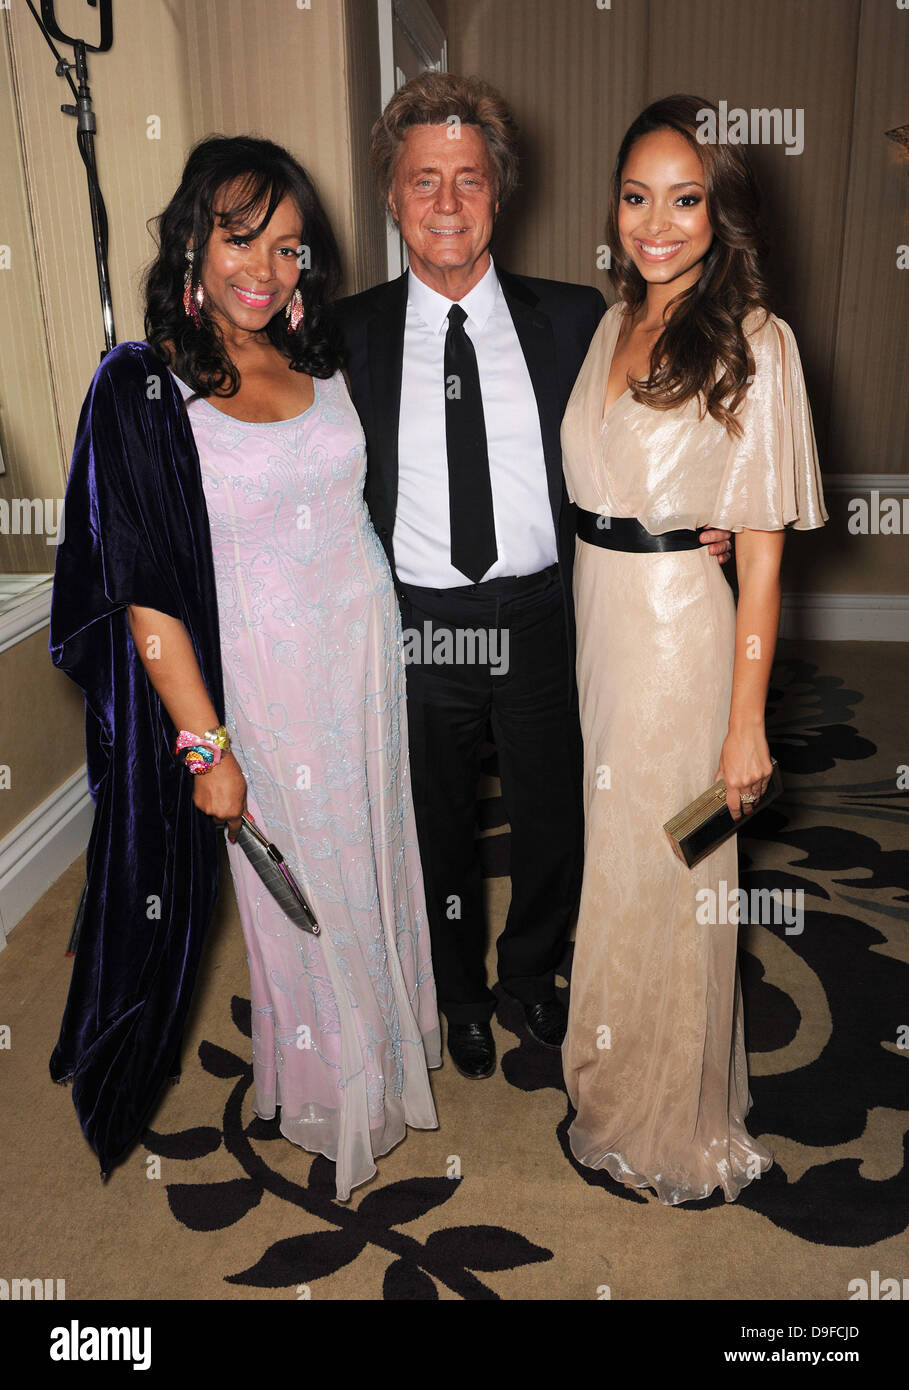 Amber Stevens and Guests The Norby Walters 21st Night of 100 Stars Awards Gala held at Beverly Hills Hotel Beverly Hills, California, USA - 27.02.11 Stock Photo